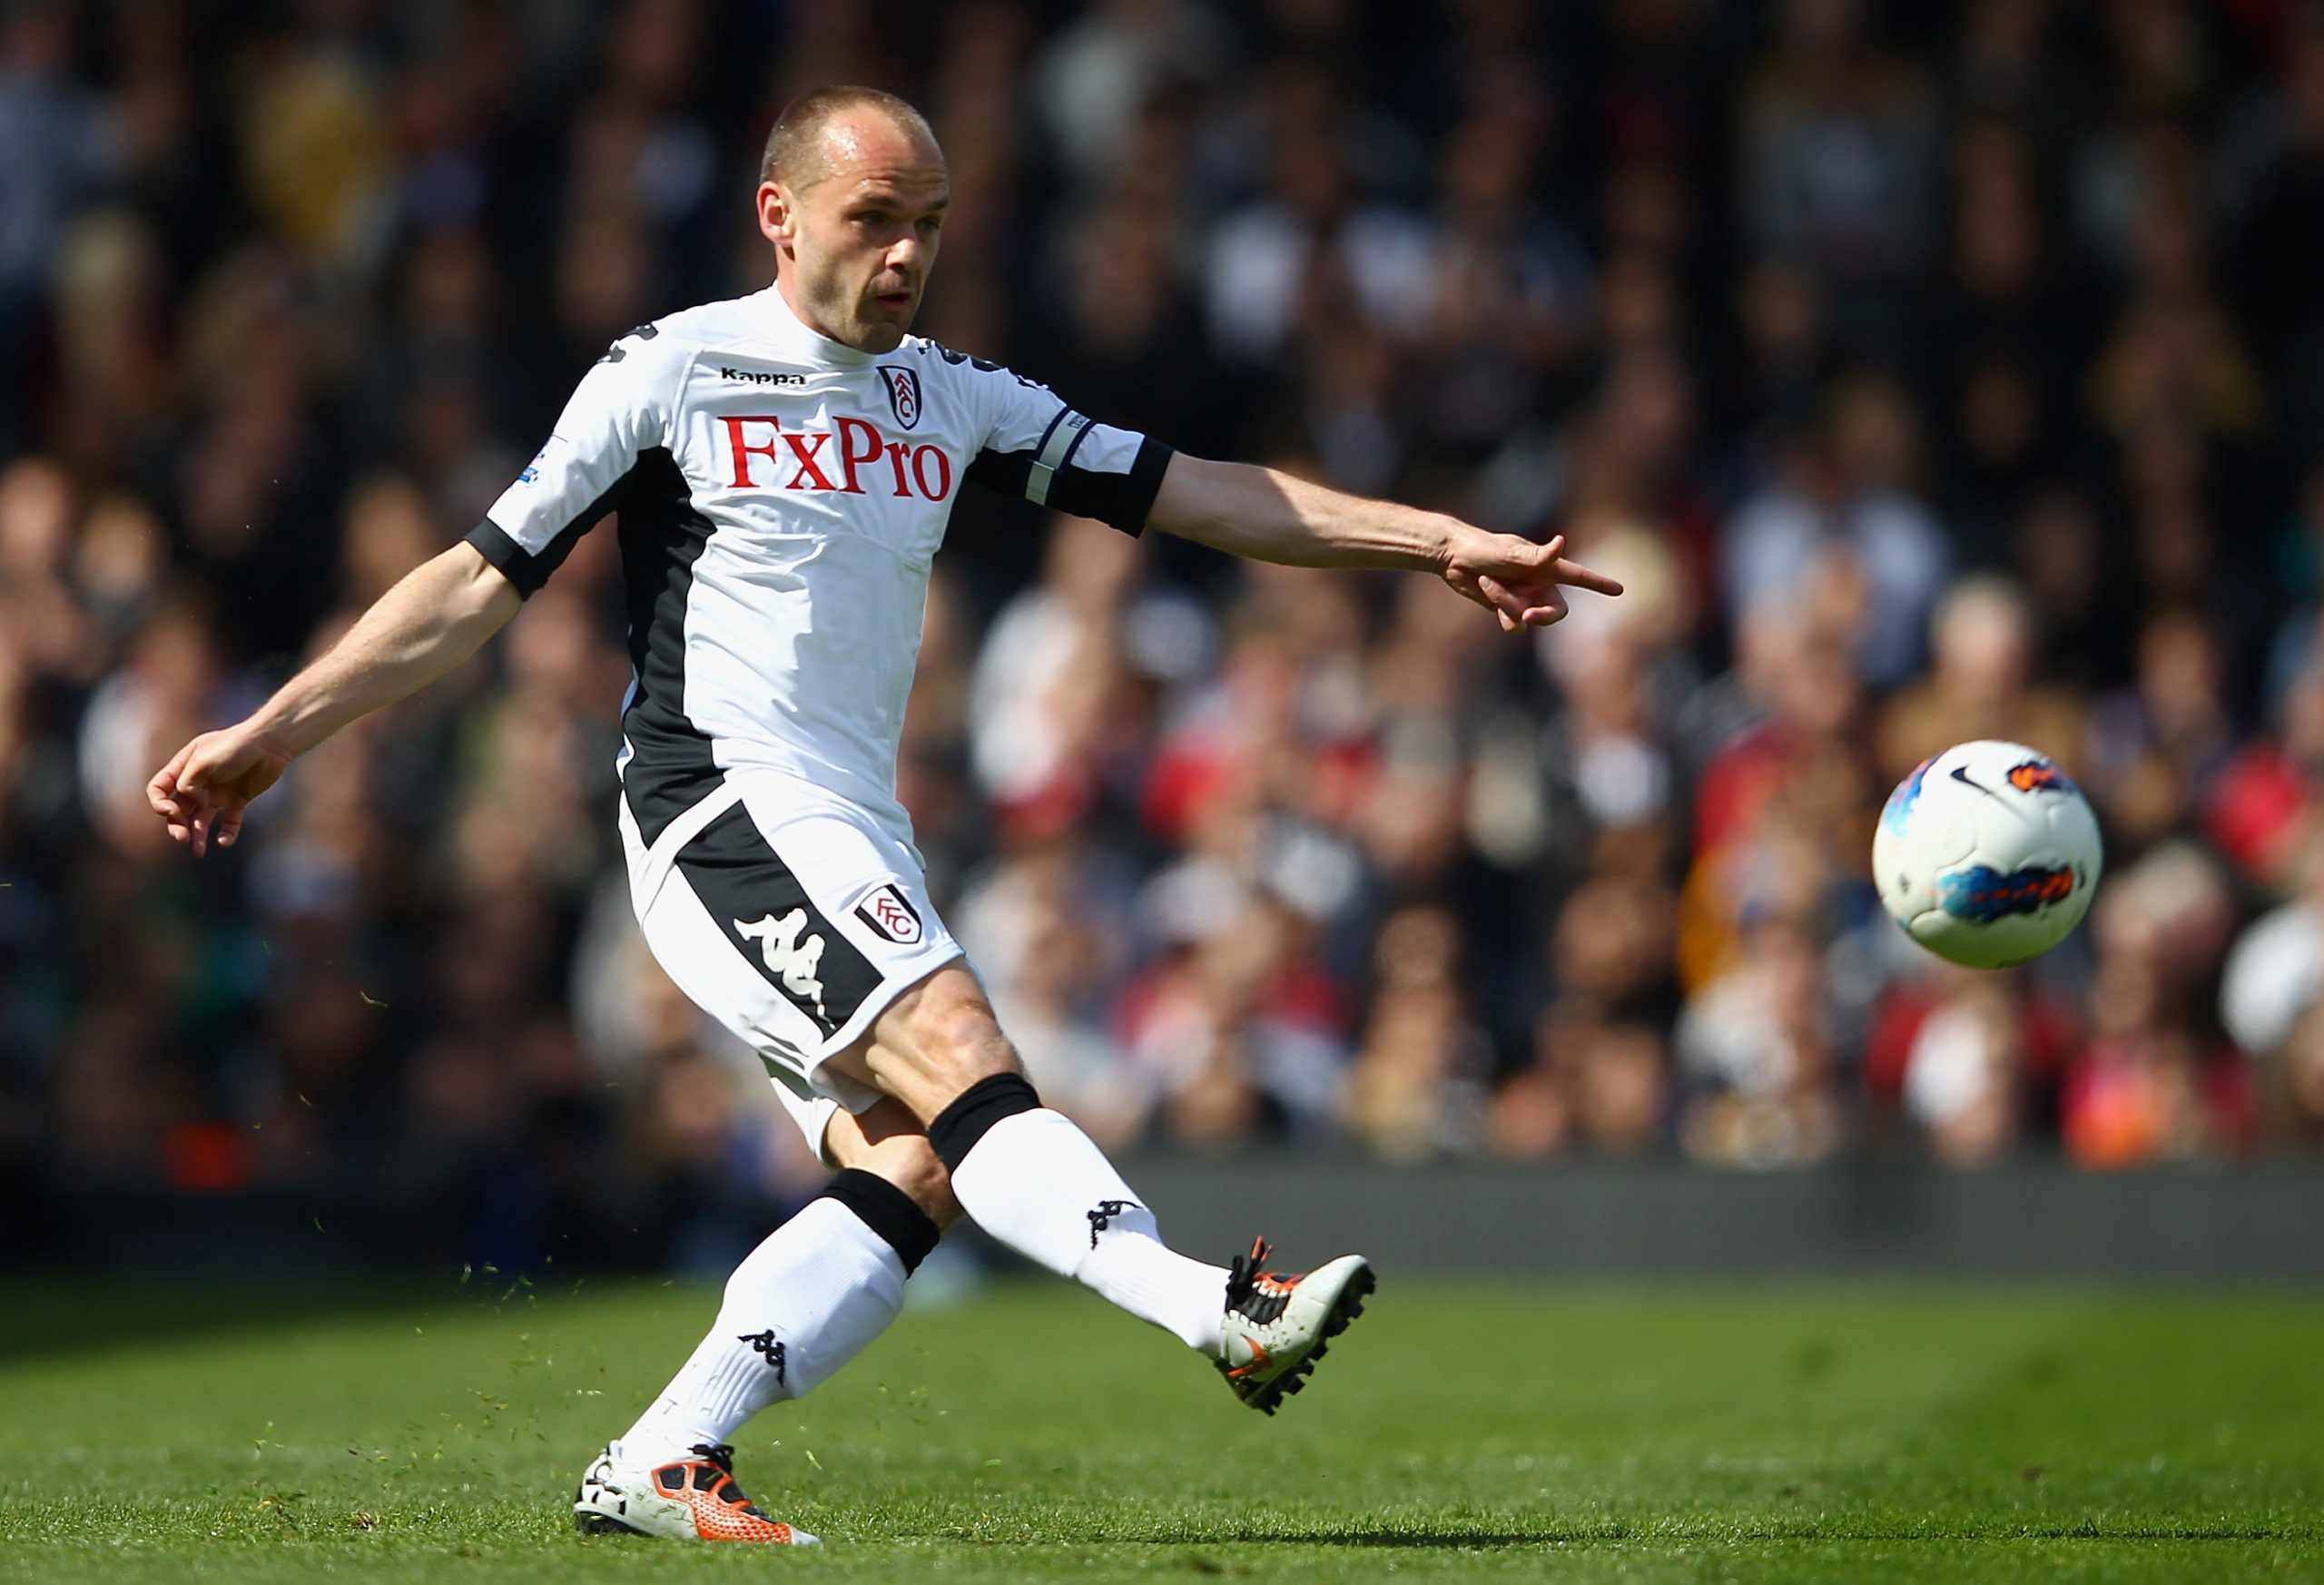 Danny Murphy in action for Fulham against Wigan Athletic in 2012.